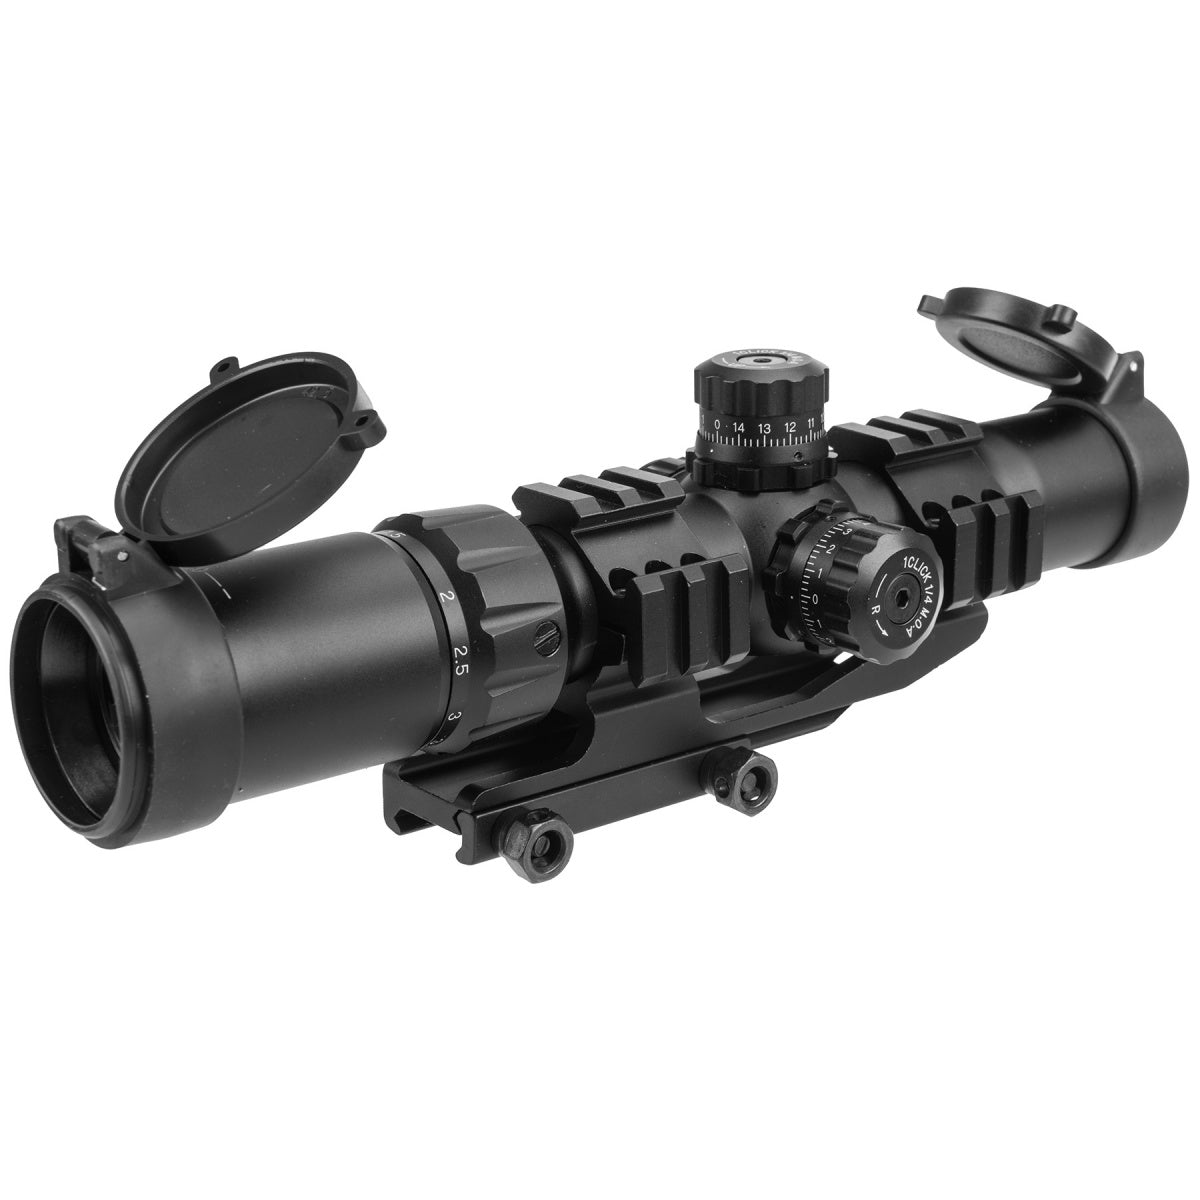 Lancer Tactical Airsoft 1.5-4x30 Illuminated MIL Dot Rifle Scope [Red/Green Dot] - ssairsoft.com